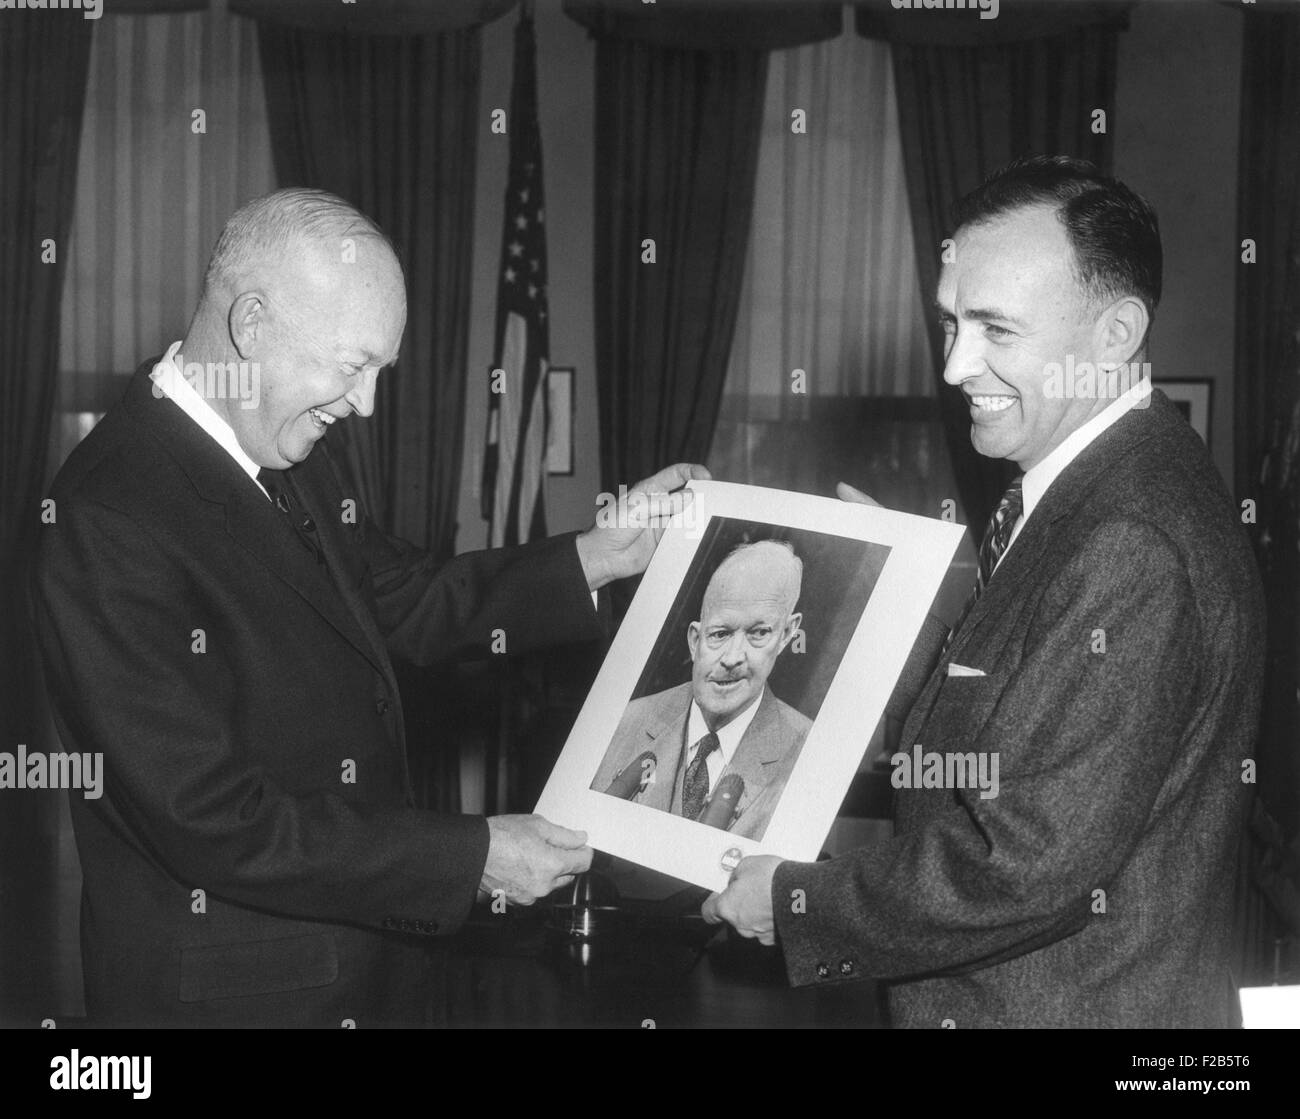 President Eisenhower looks at a prize-winning portrait of him by its creator. The 1959 White House News Photographers Association finalists were Elwood Baker, Charles Corte, Jack Fletcher, Wallace McNamee, Francis Routt, Paul Schutzer, George Tames. - (BSLOC 2014 16 62) Stock Photo